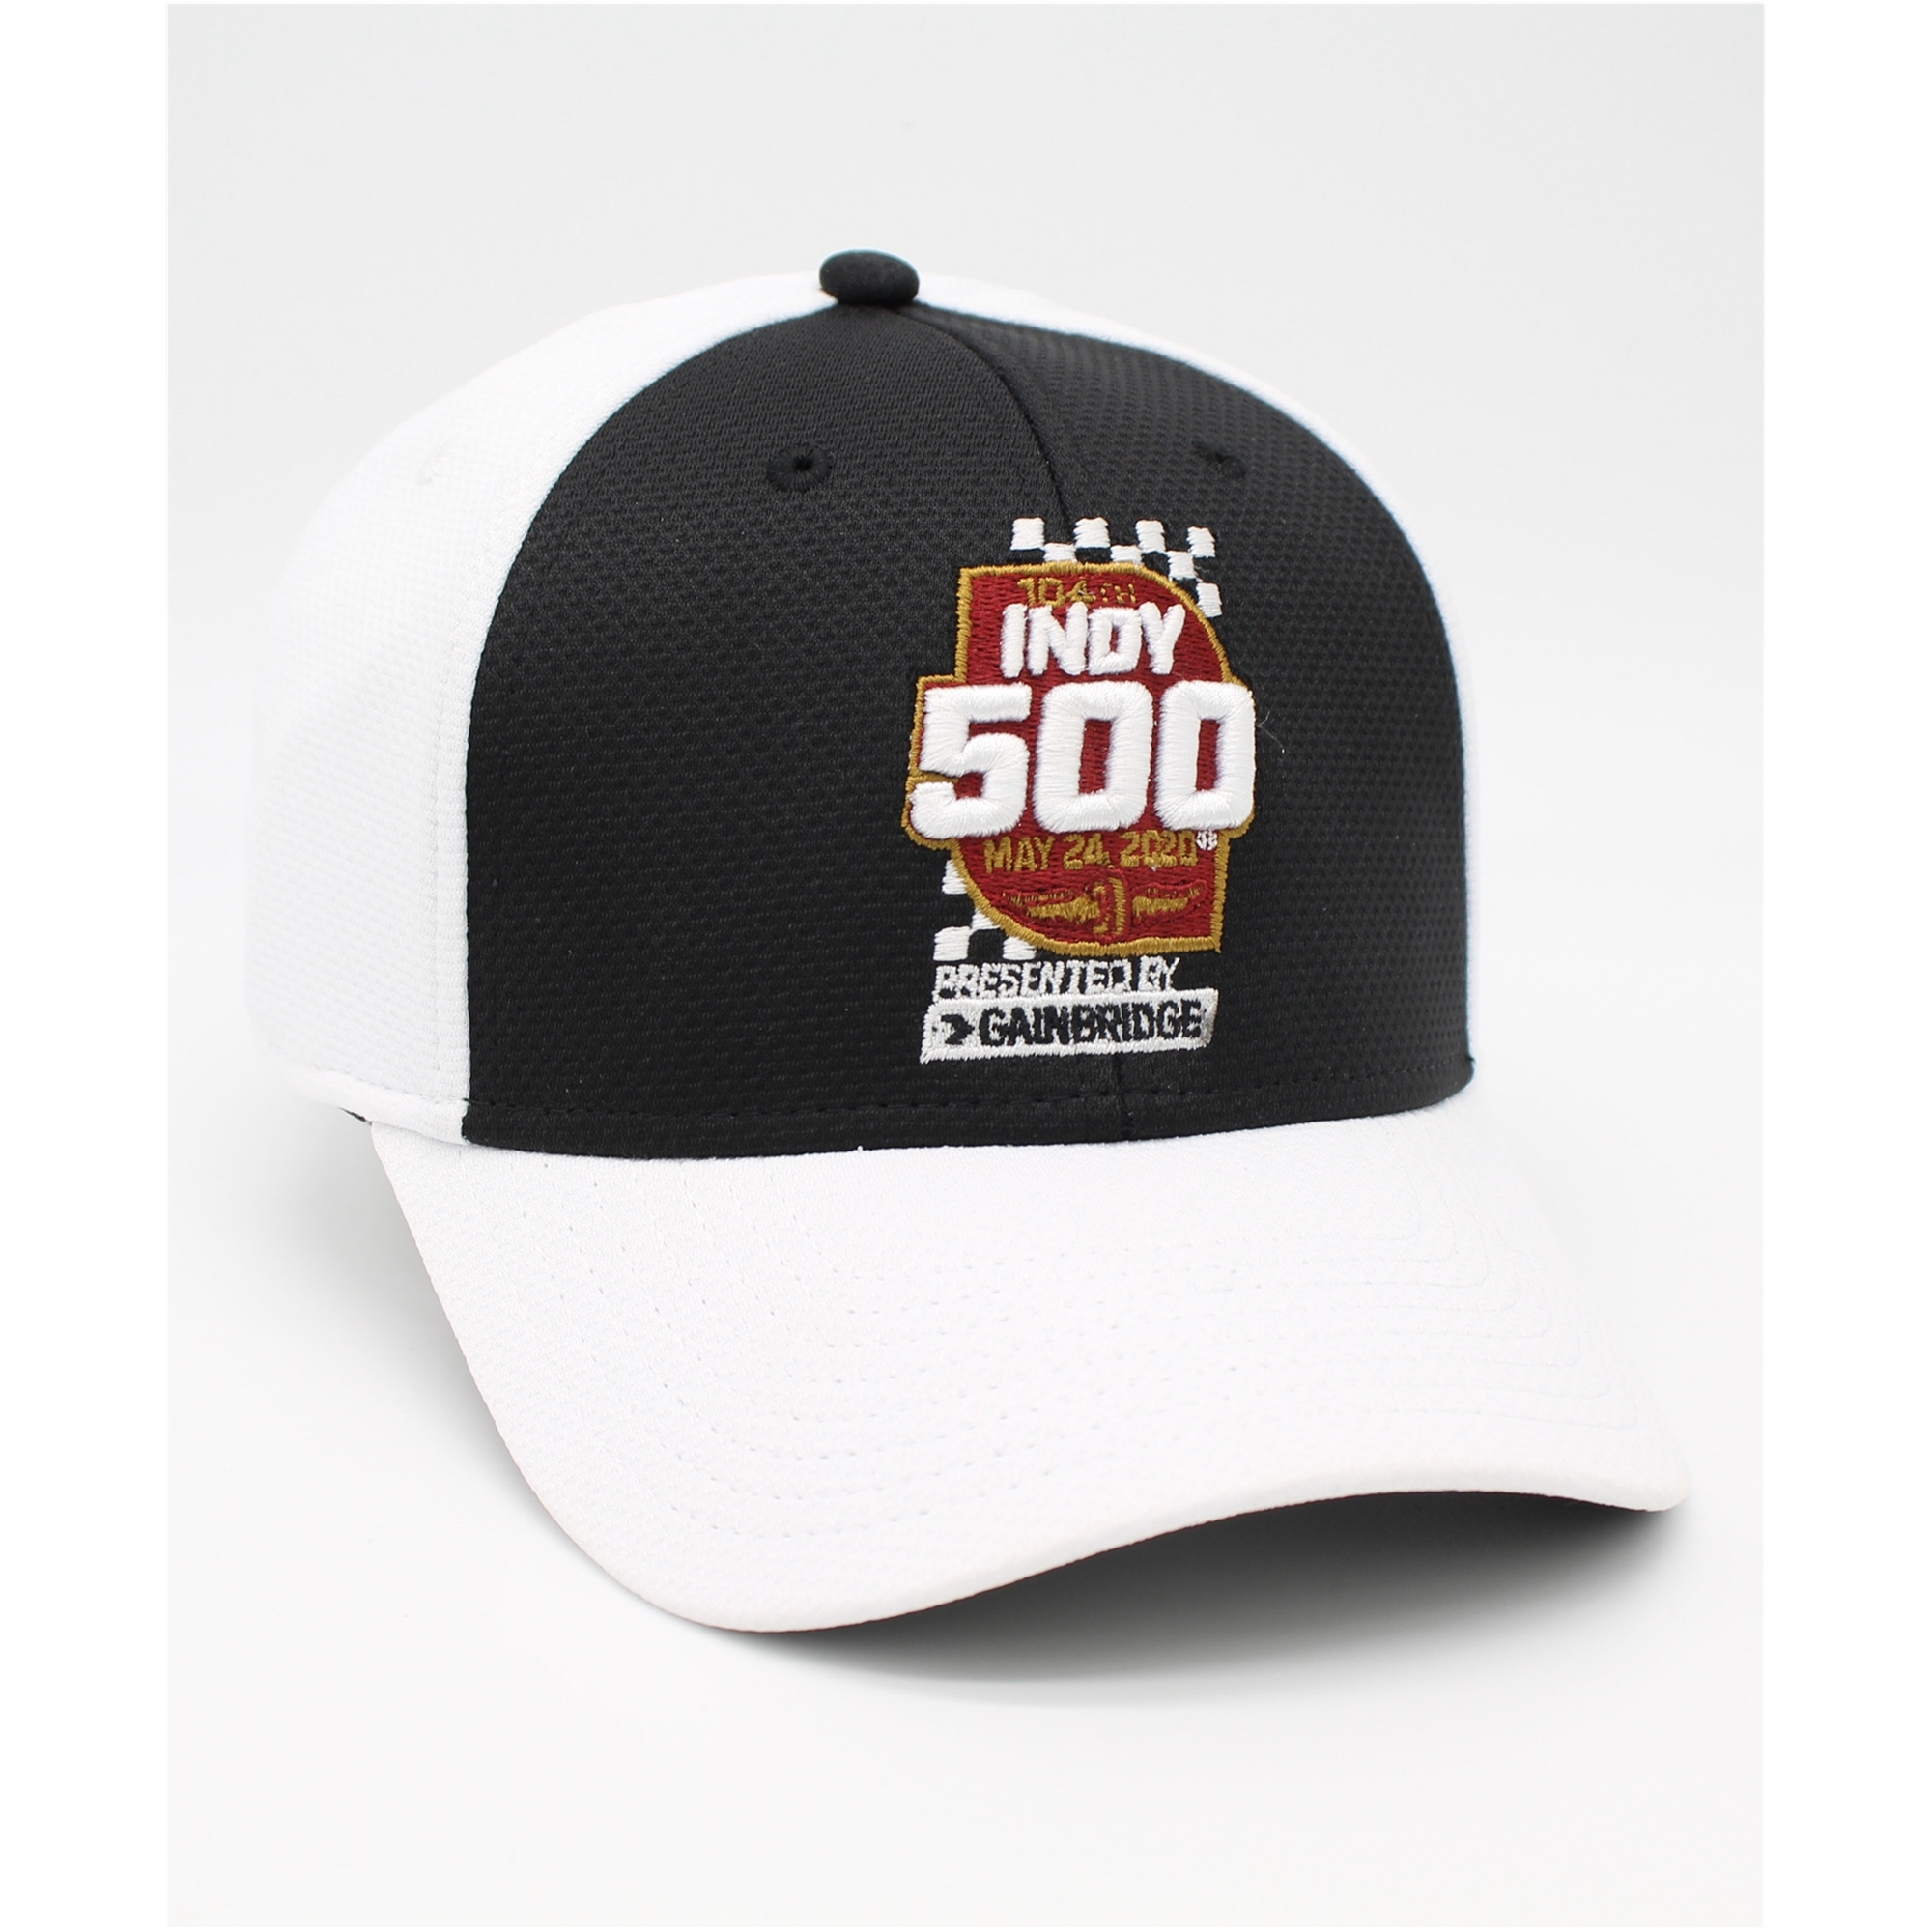 INDY 500 Mens This Is May Fitted Baseball Cap, White, S/M - image 1 of 4